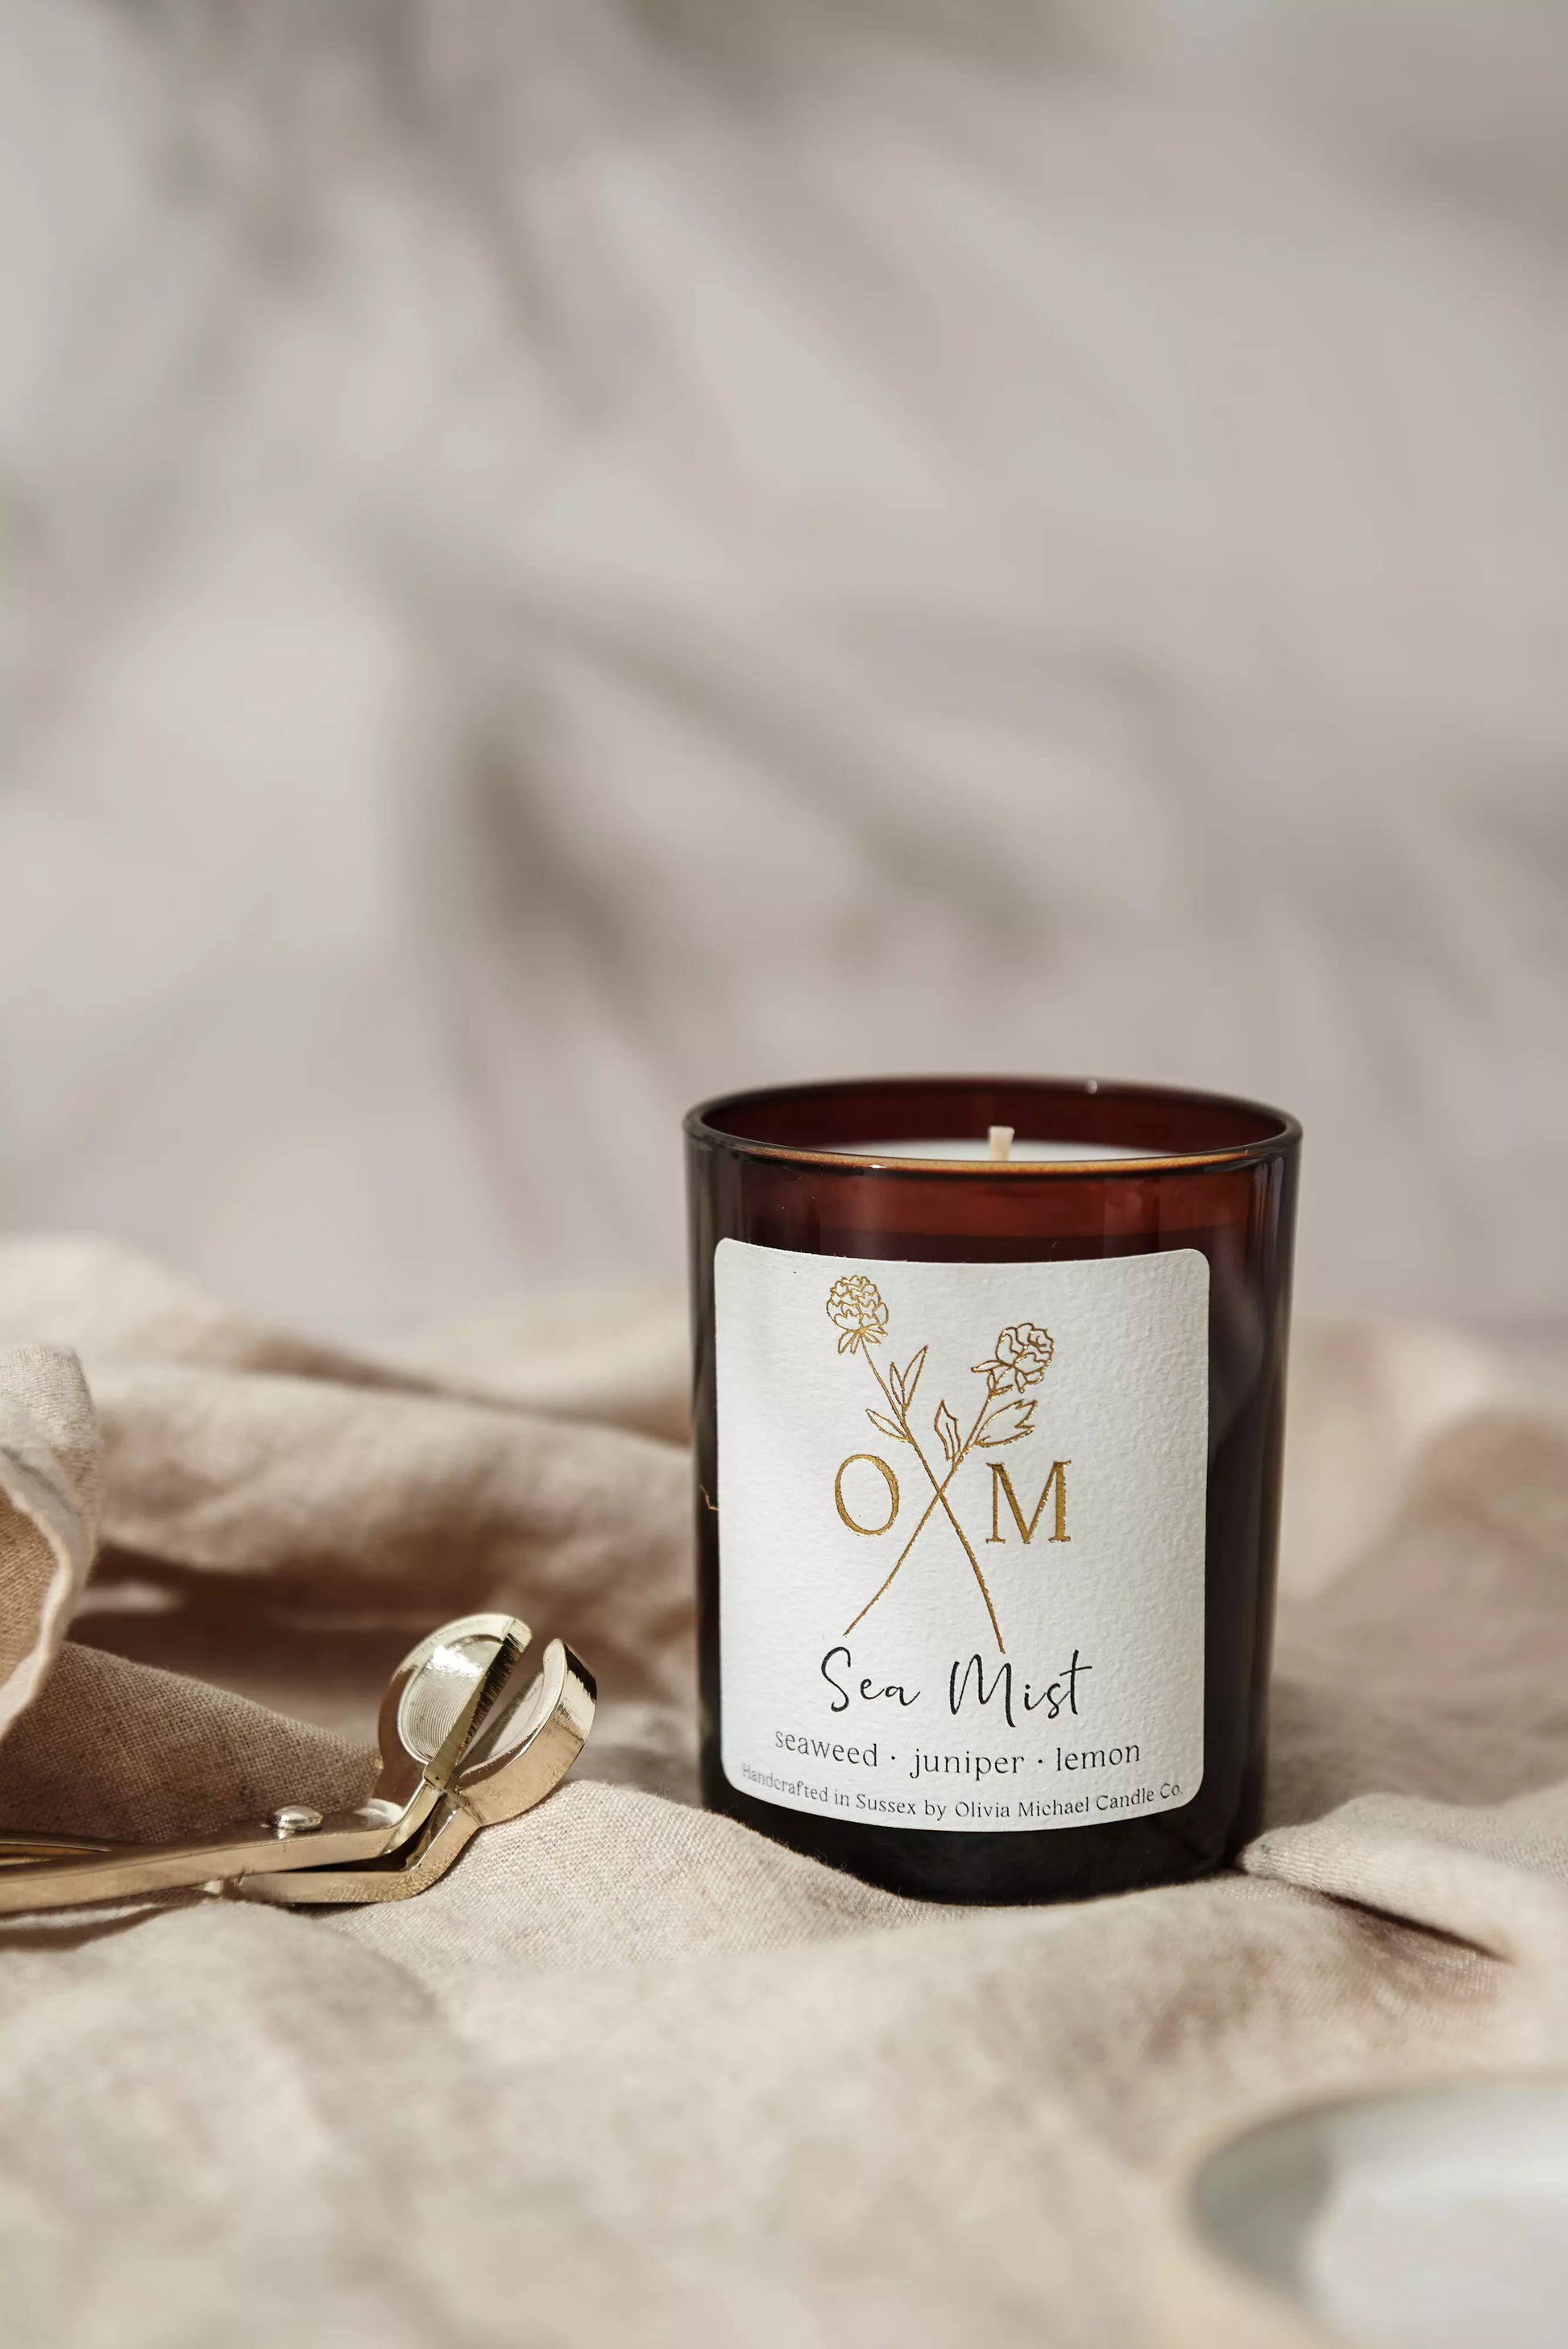 Our seaweed and juniper scented candle is on display in an amber glass jar.